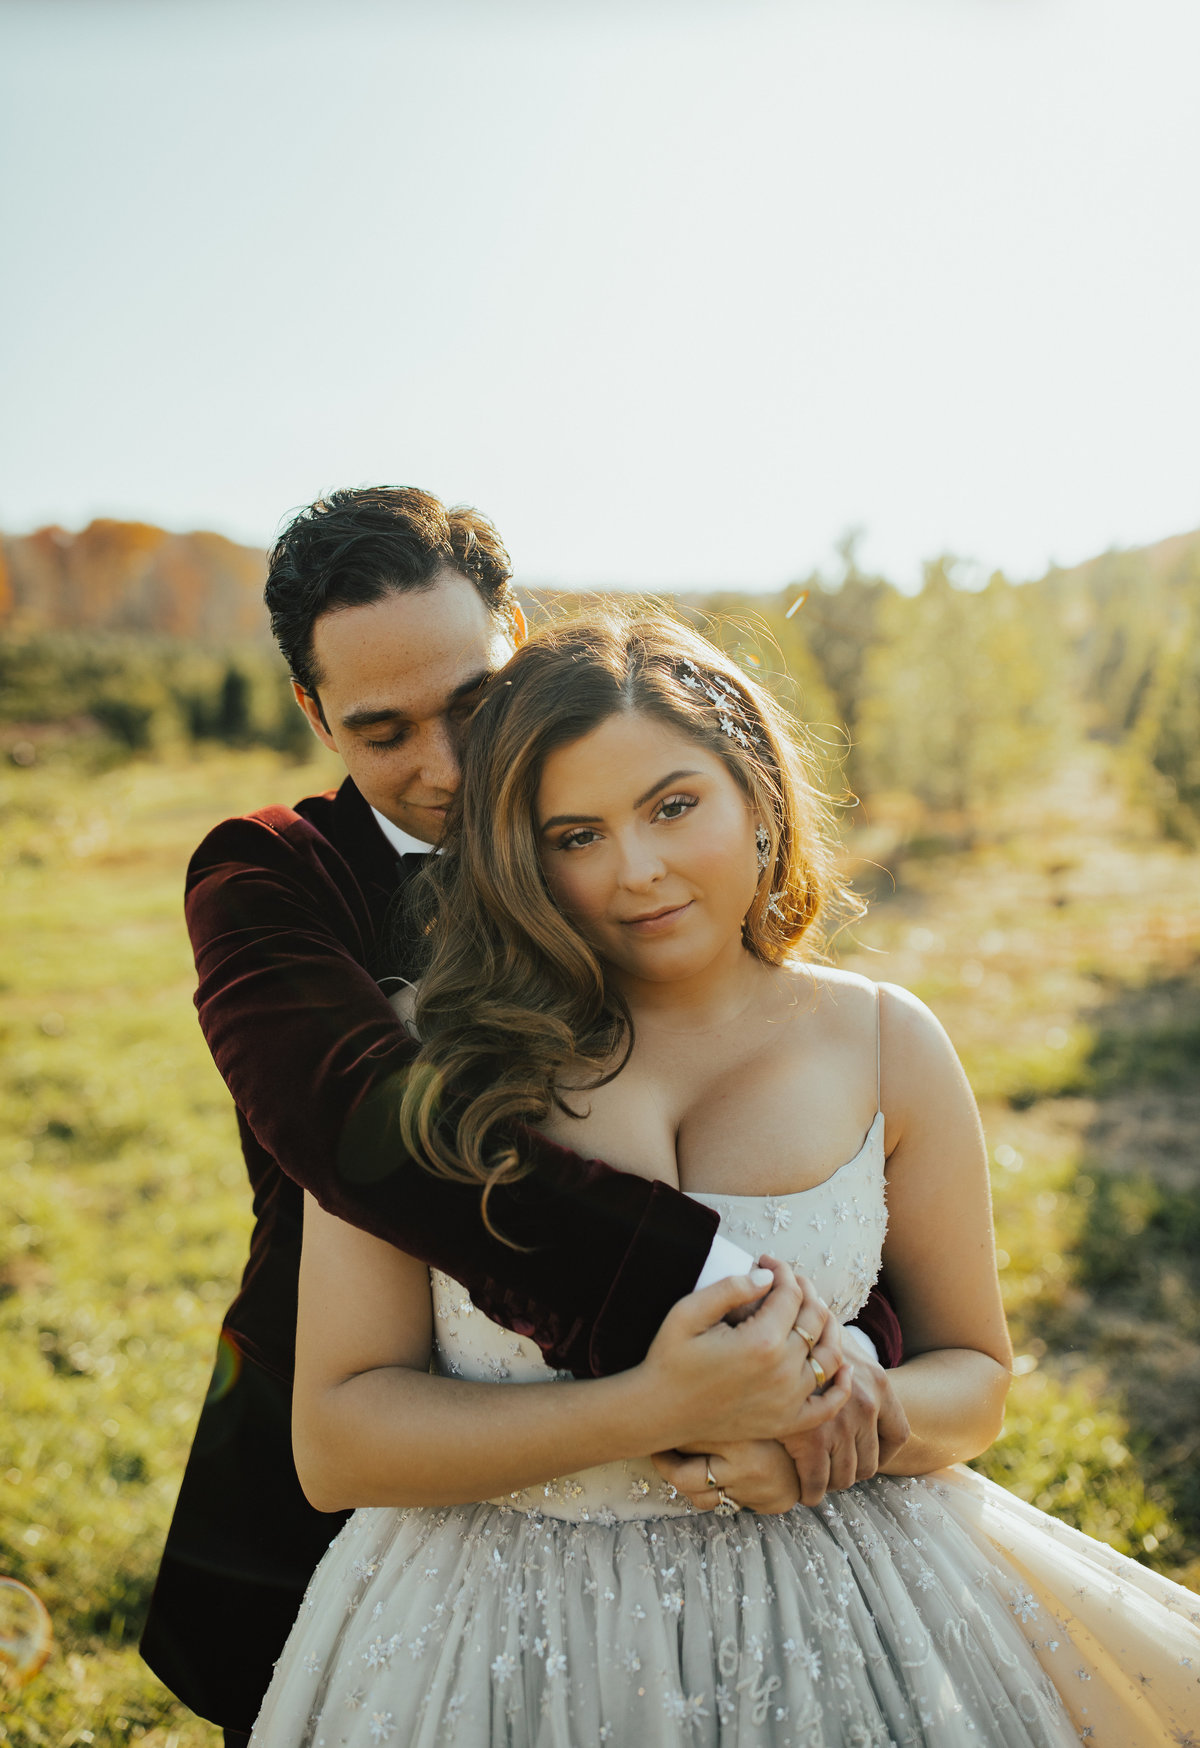 Christy-l-Johnston-Photography-Monica-Relyea-Events-Noelle-Downing-Instagram-Noelle_s-Favorite-Day-Wedding-Battenfelds-Christmas-tree-farm-Red-Hook-New-York-Hudson-Valley-upstate-november-2019-AP1A7661